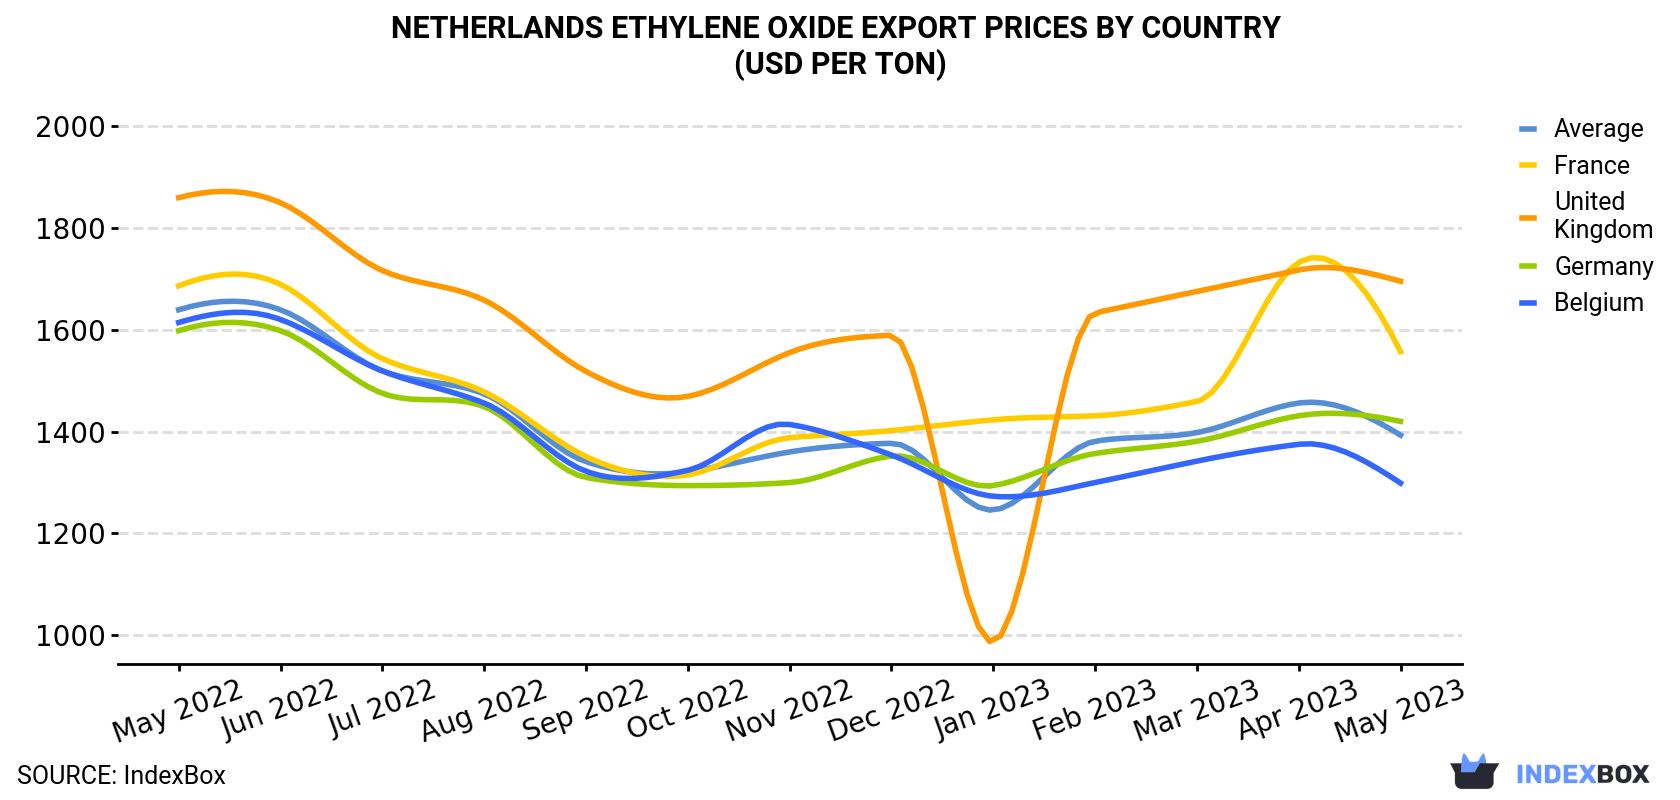 Netherlands Ethylene Oxide Export Prices By Country (USD Per Ton)